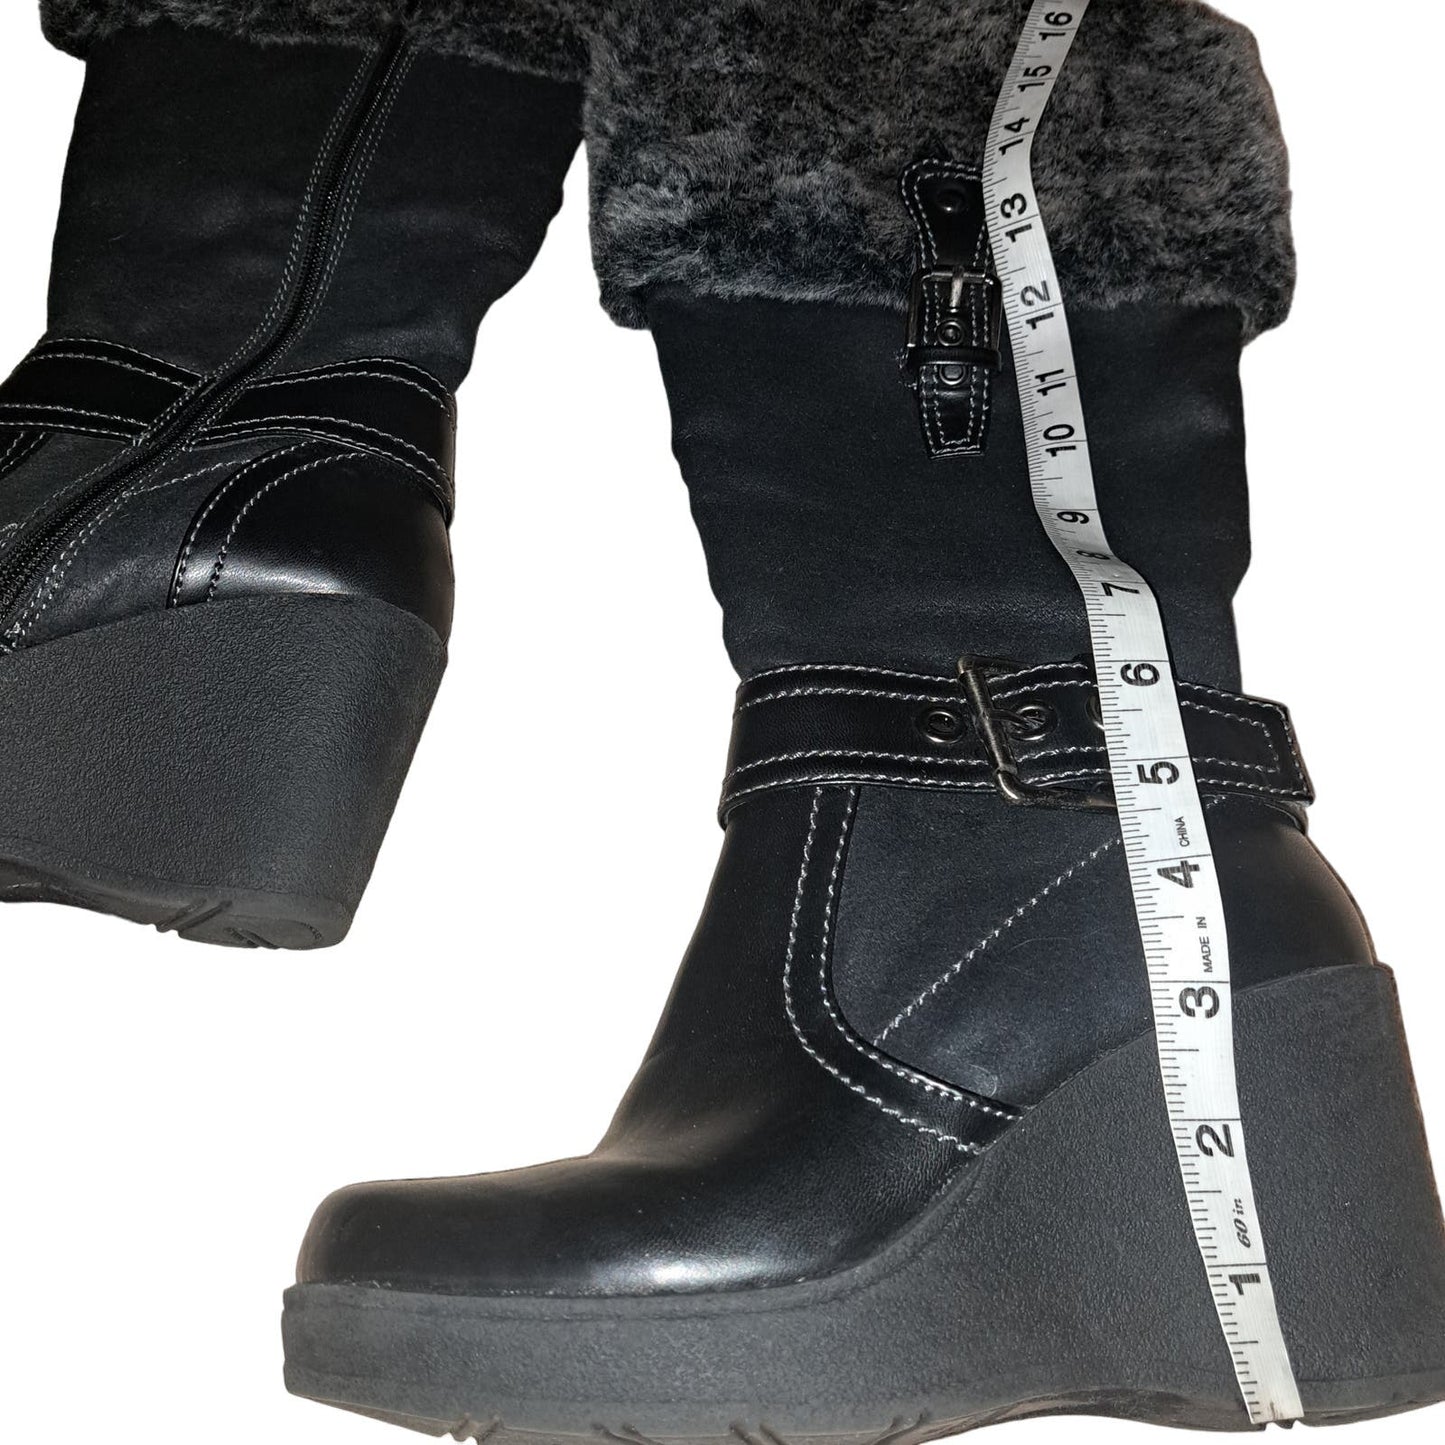 NEW Size 6 Med Black So Wear IT Declare IT Black Tall Fur Topped Boots